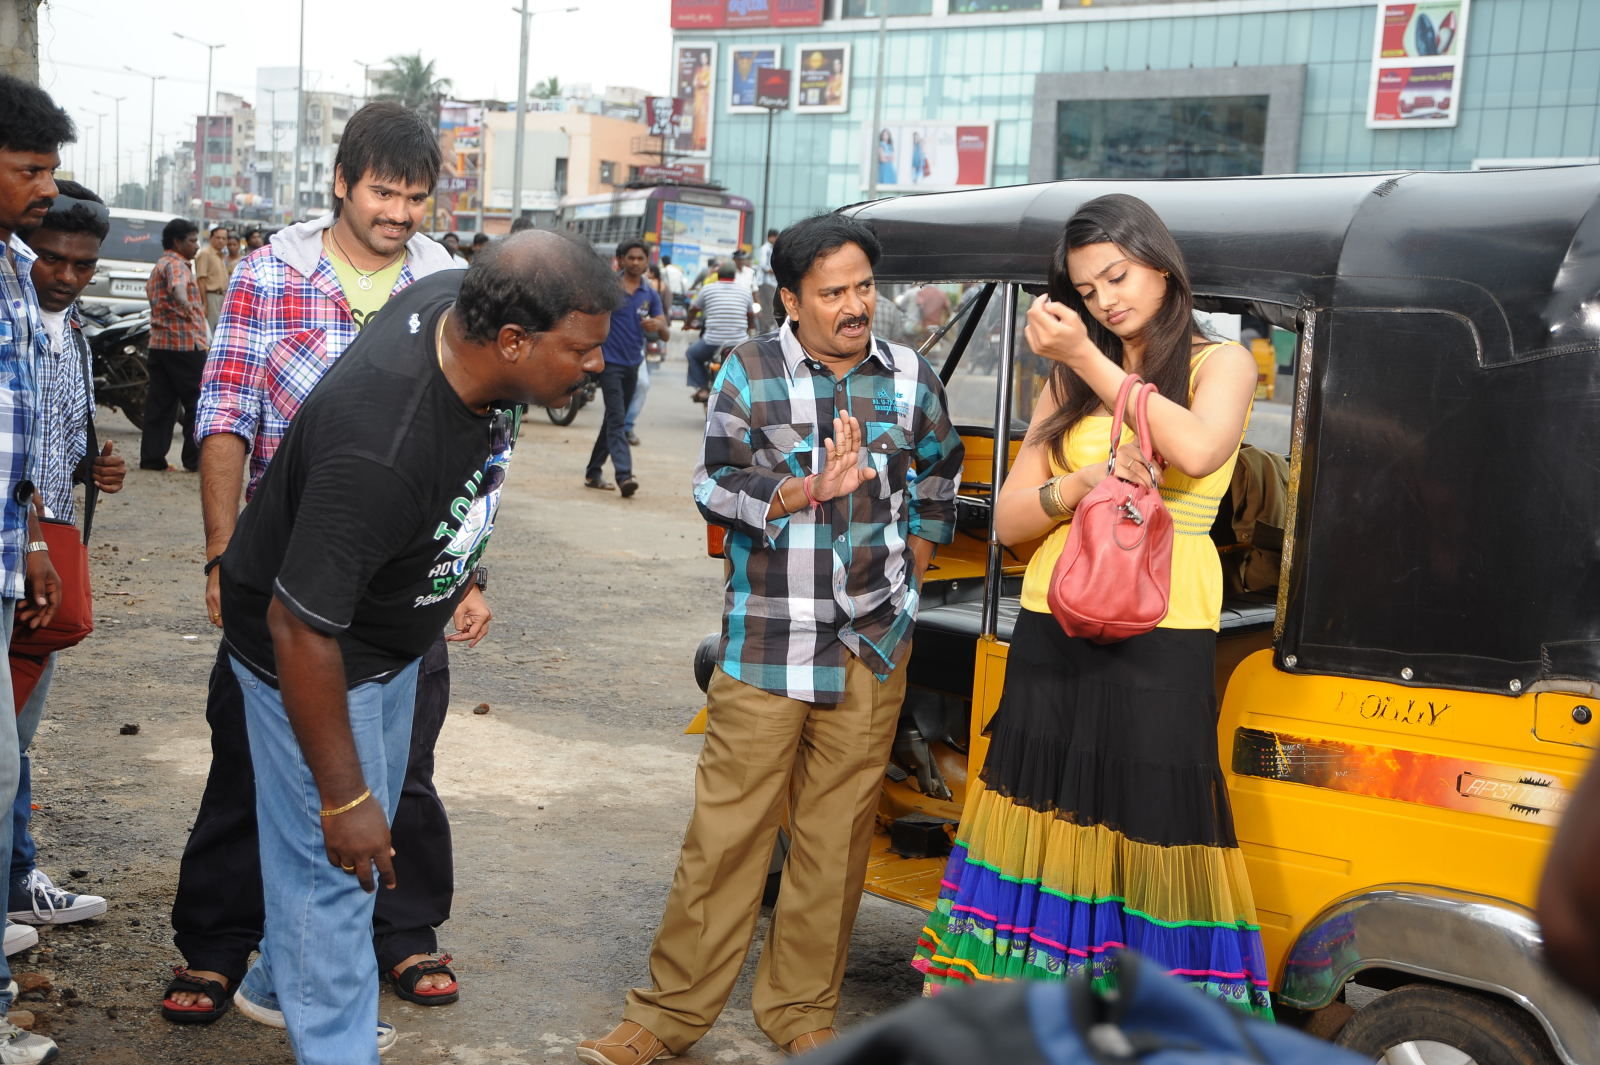 Made in Vizag New Stills | Picture 325628